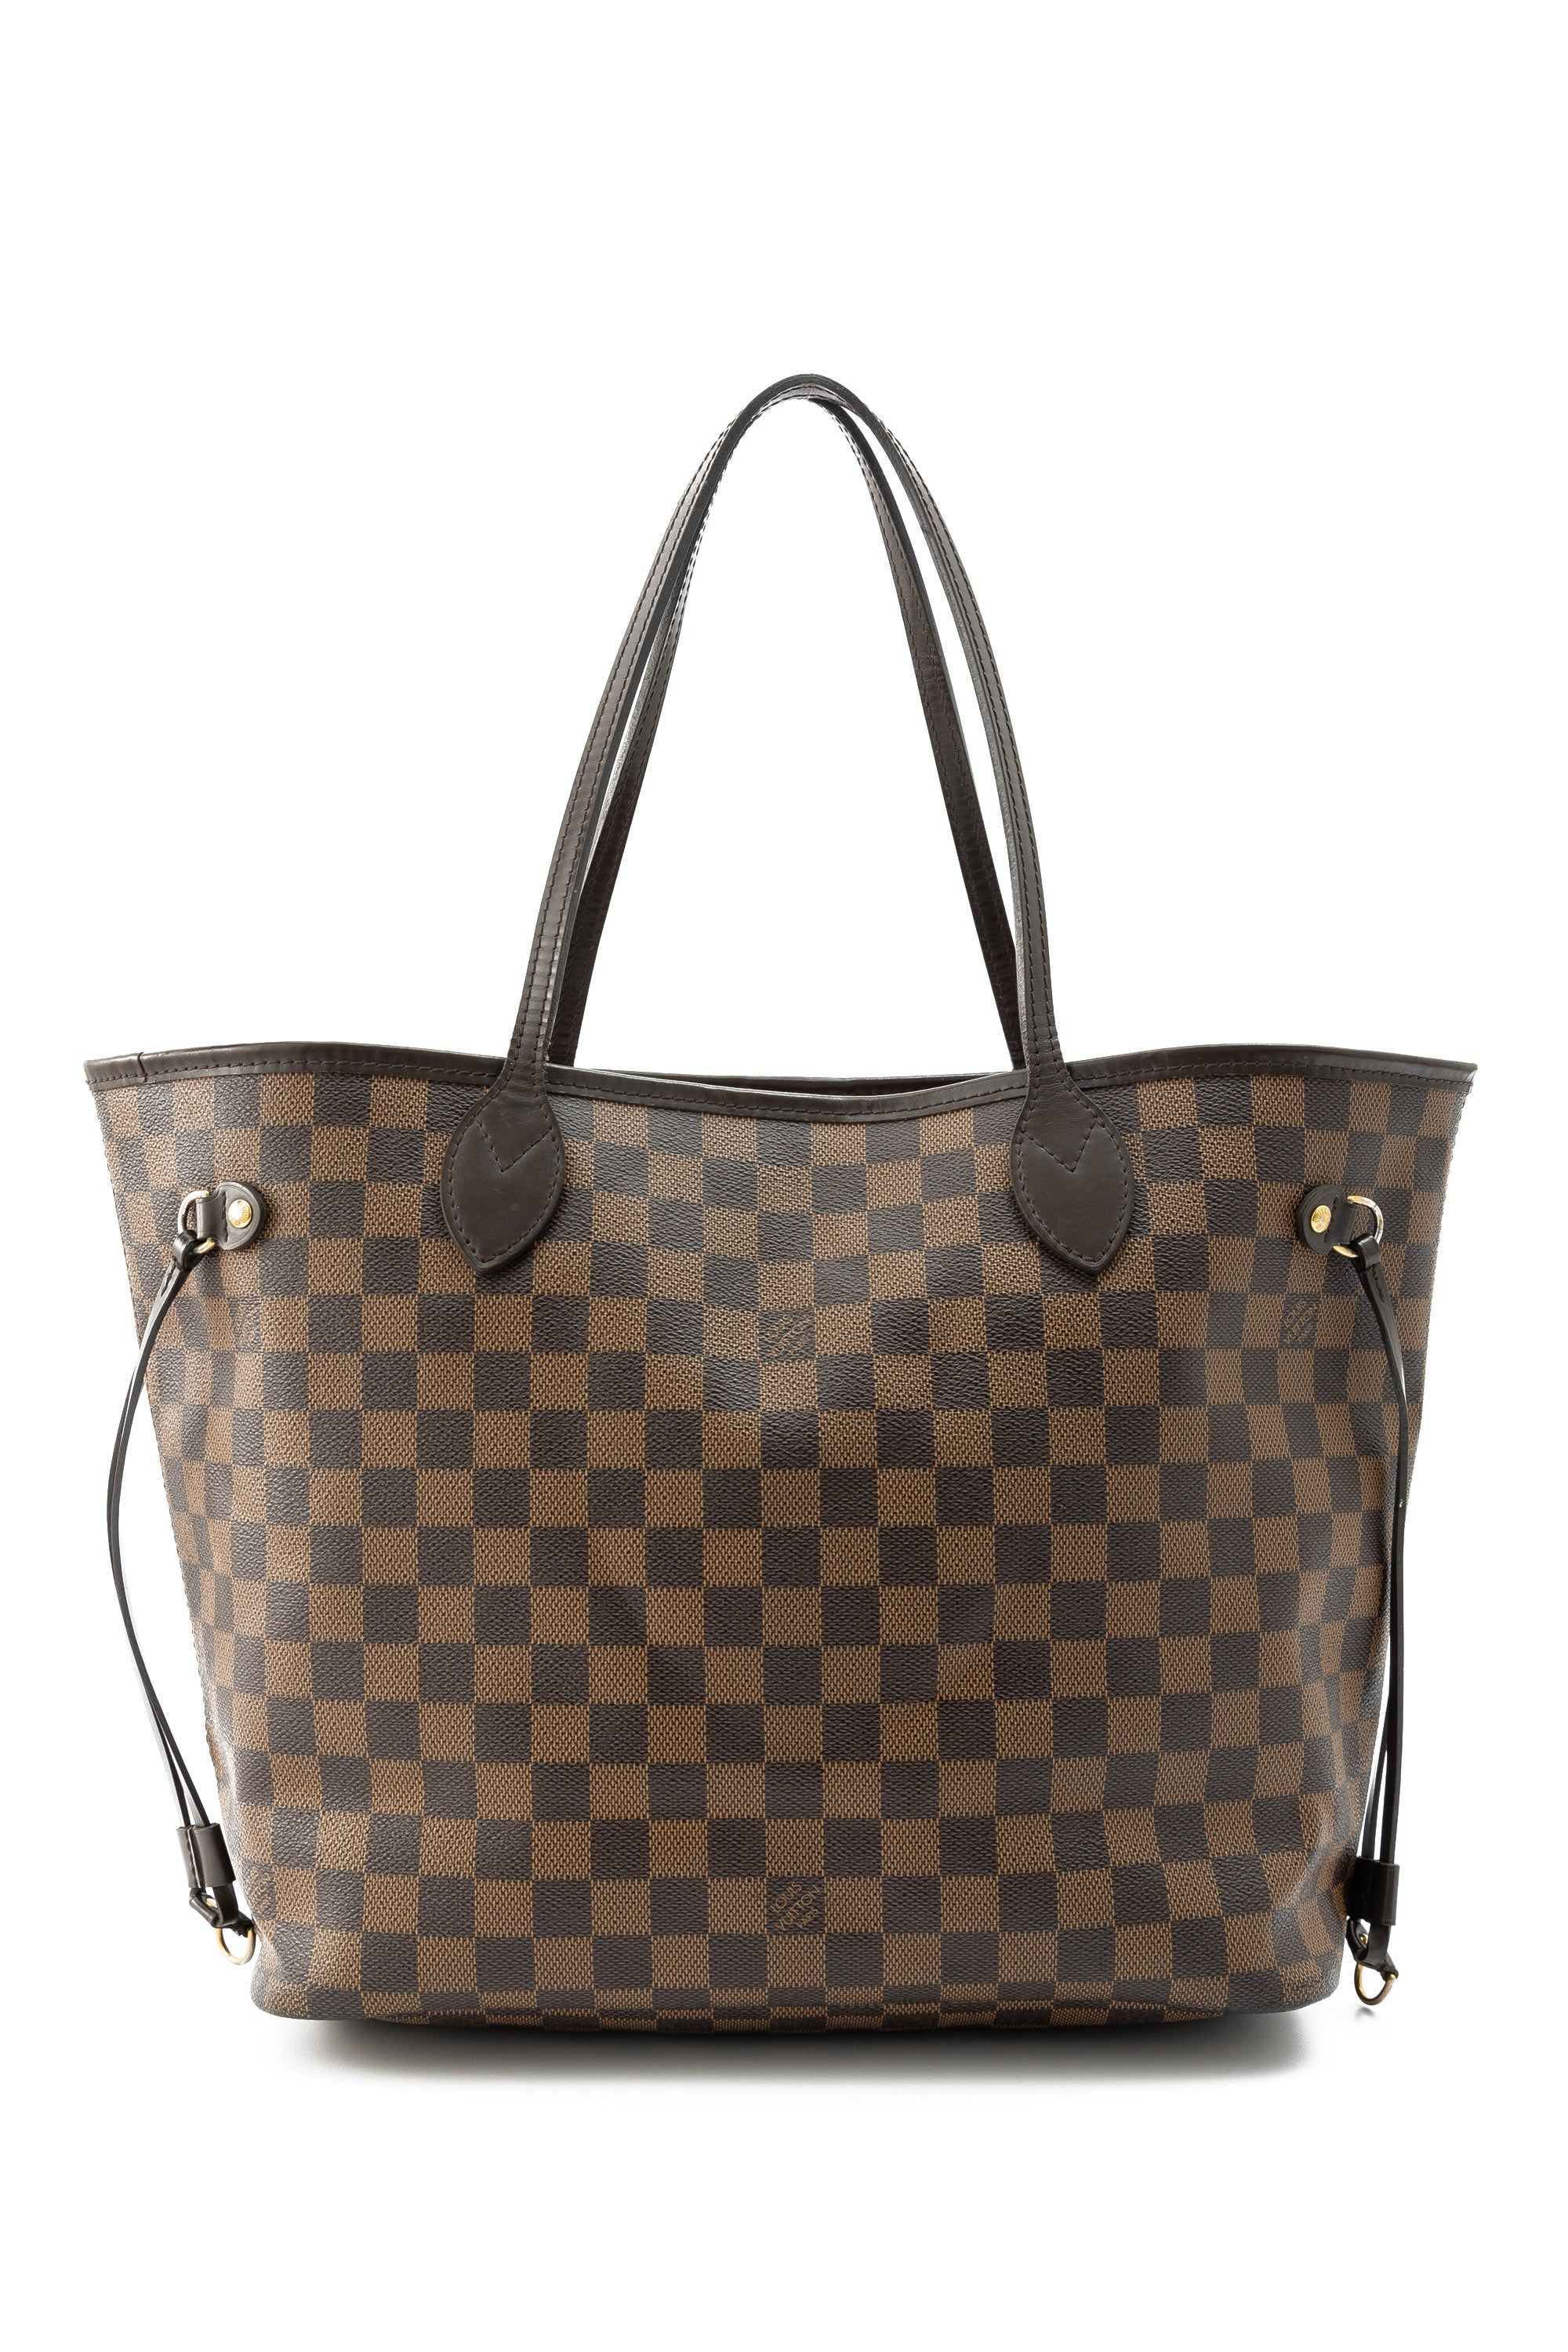 Louis Vuitton Neverfull Limited Edition Stripes Tote bag in brown canvas,  GHW